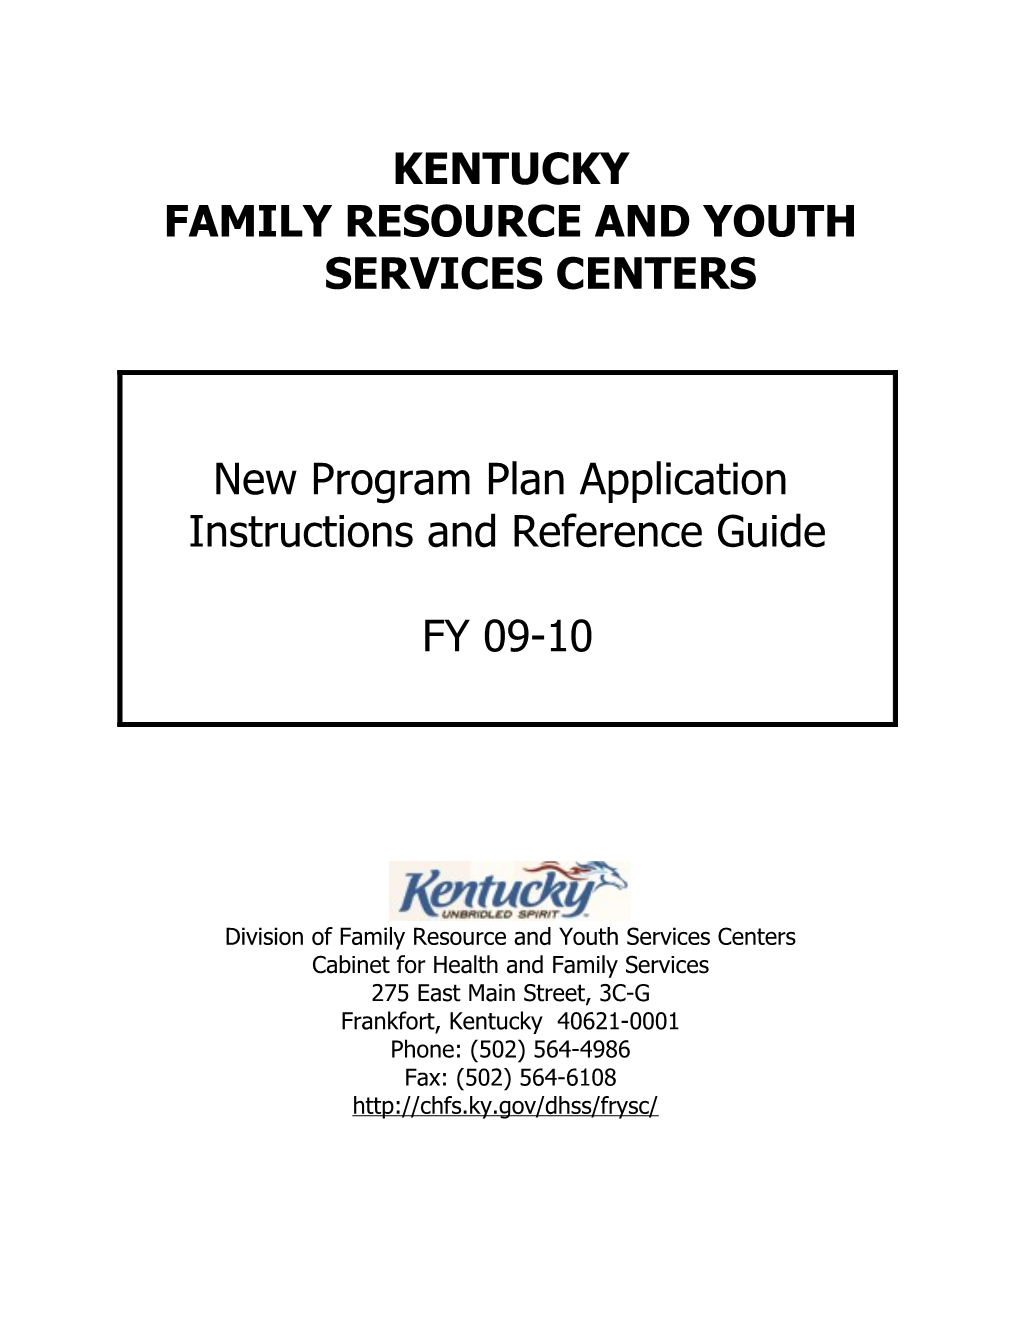 Family Resource And Youth Services Centers